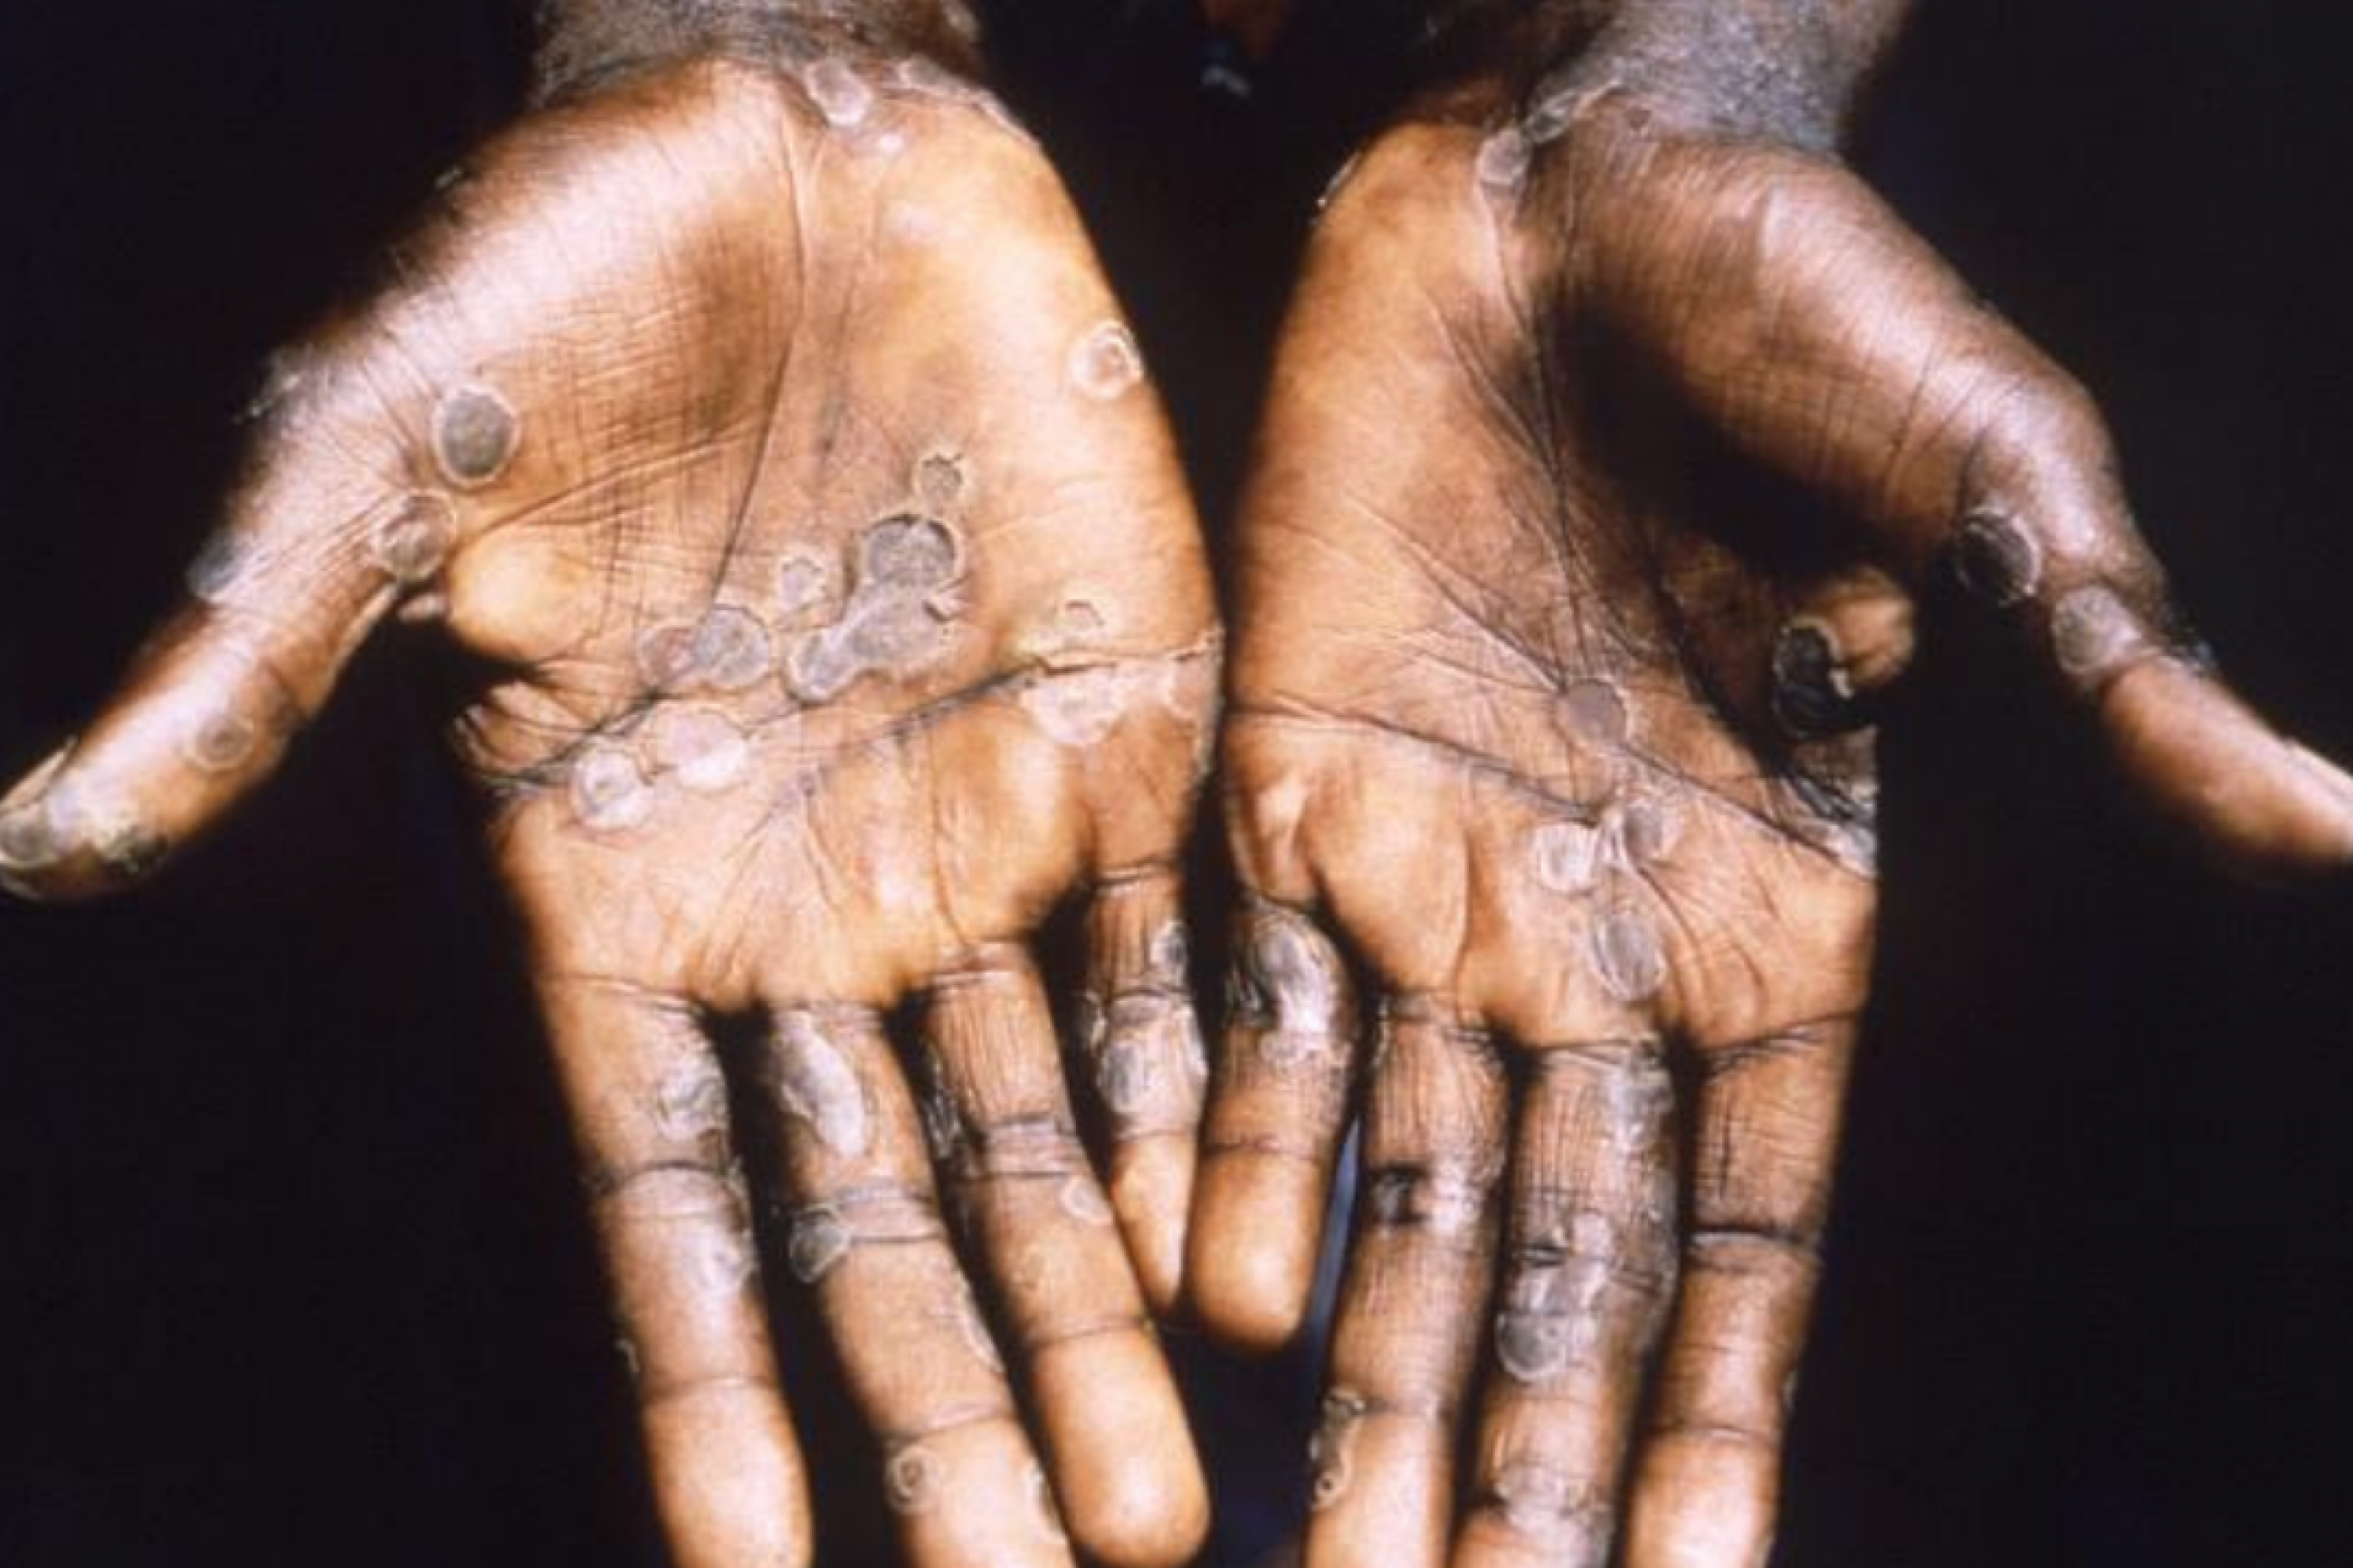 The palms of a person suffering from monkeypox show small circular shaped welts. The rash is strikingly similar to a smallpox rash.